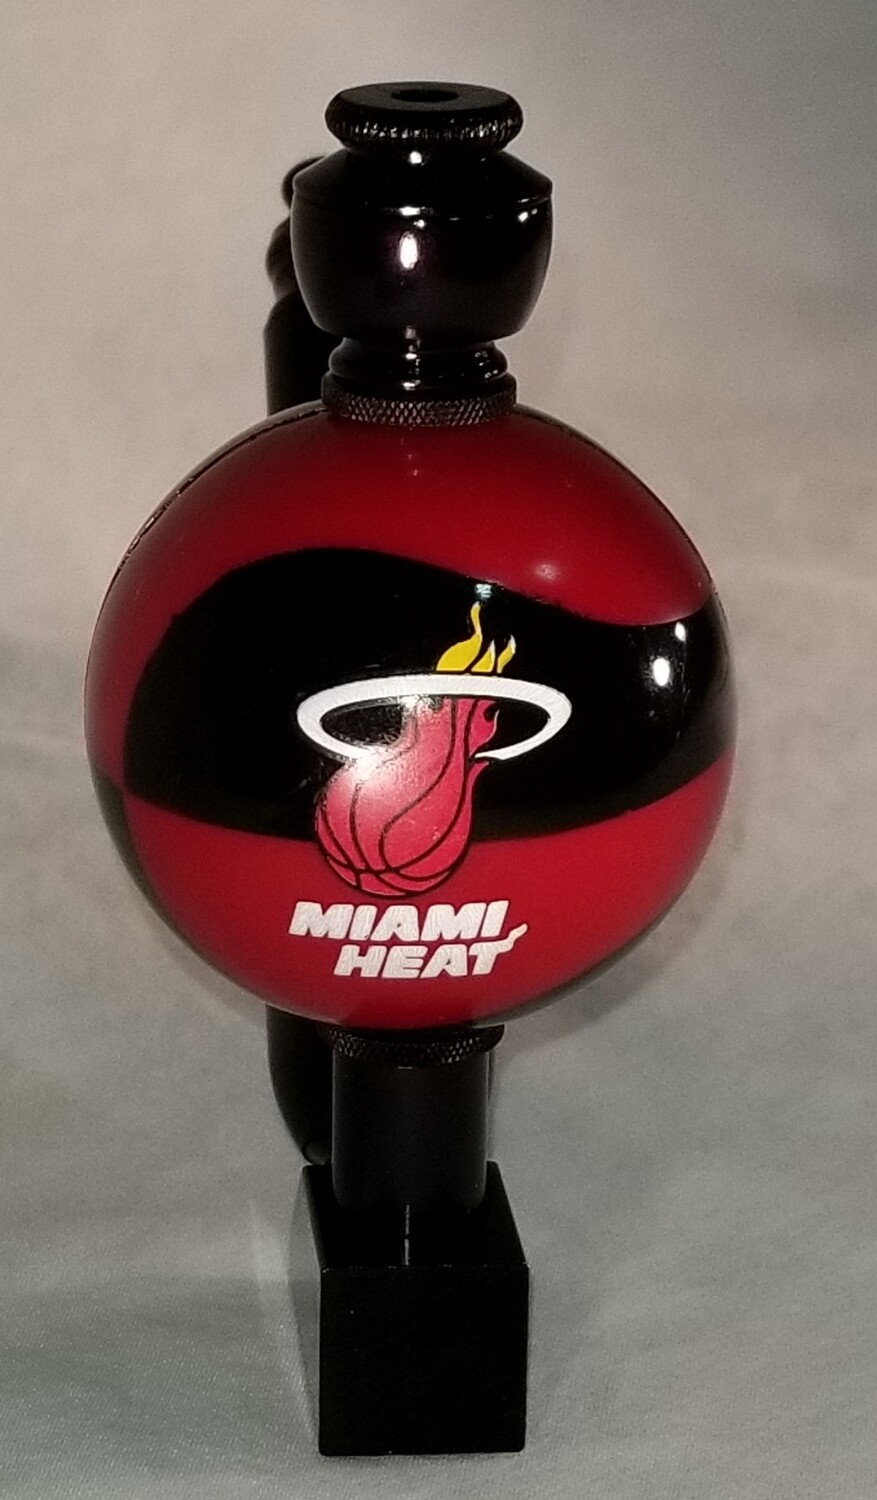 MIAMI HEAT "BAD ASS" COLOR BASKETBALL SMOKING PIPE Black Anodized/Color Ball